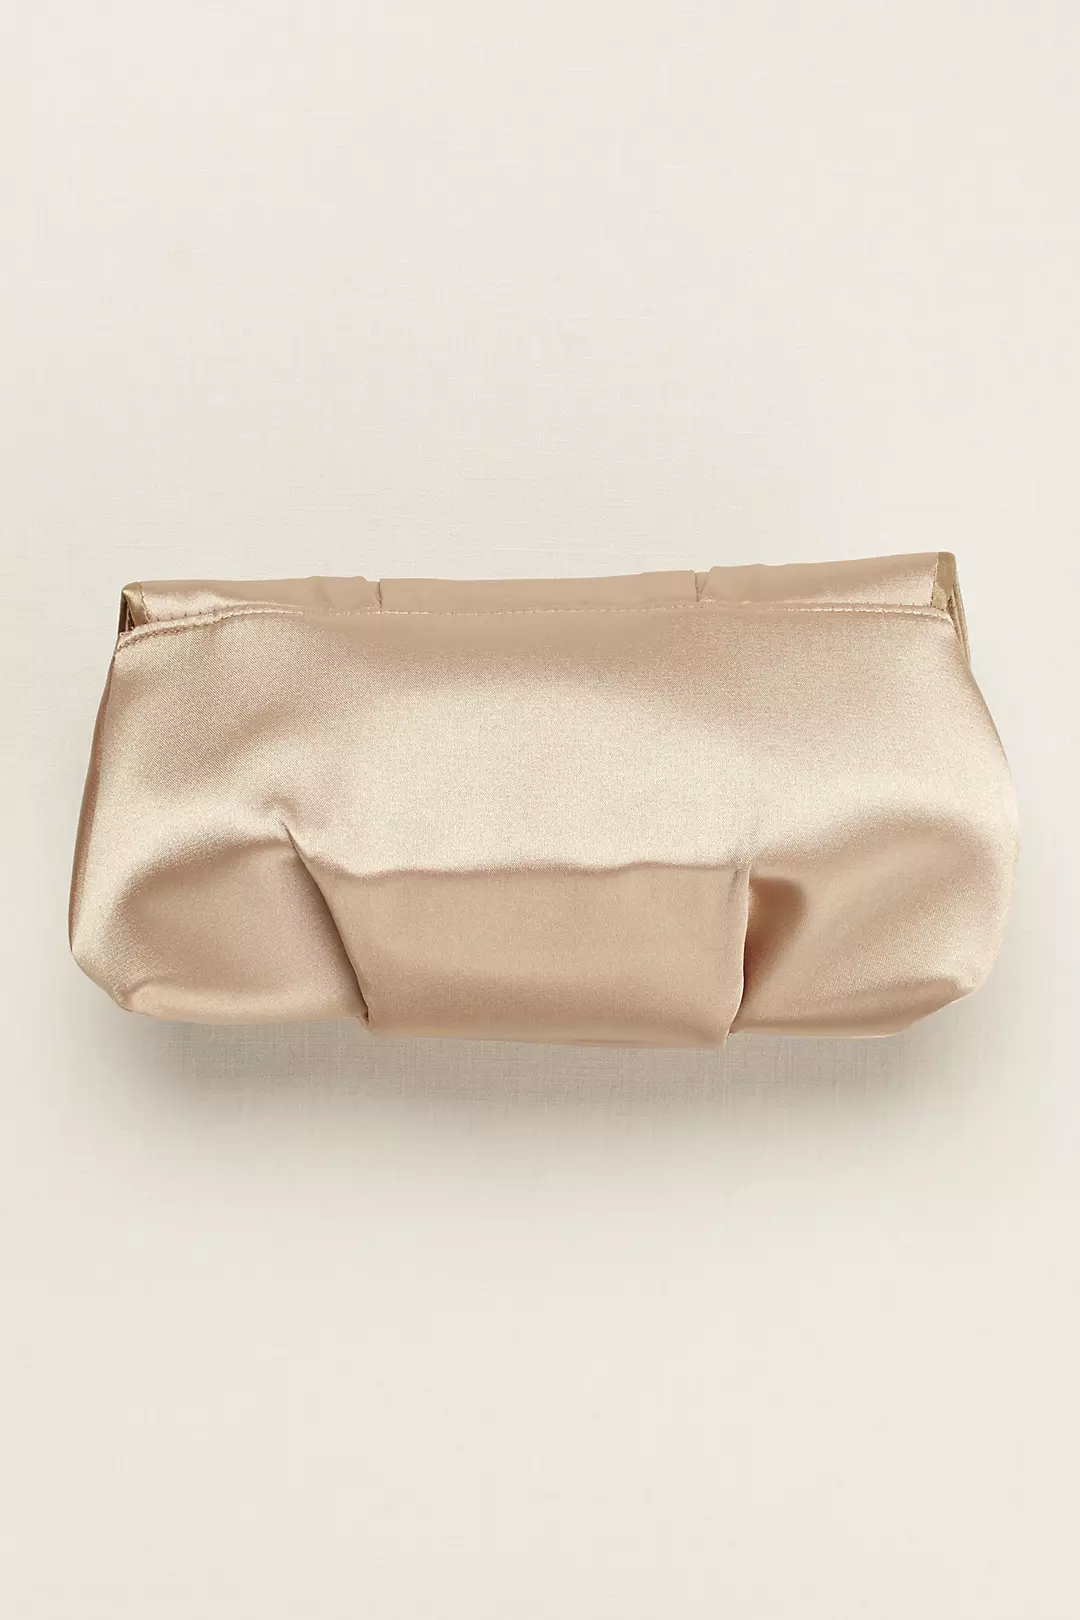 Satin Clutch with Butterfly Ornament by Menbur Image 2